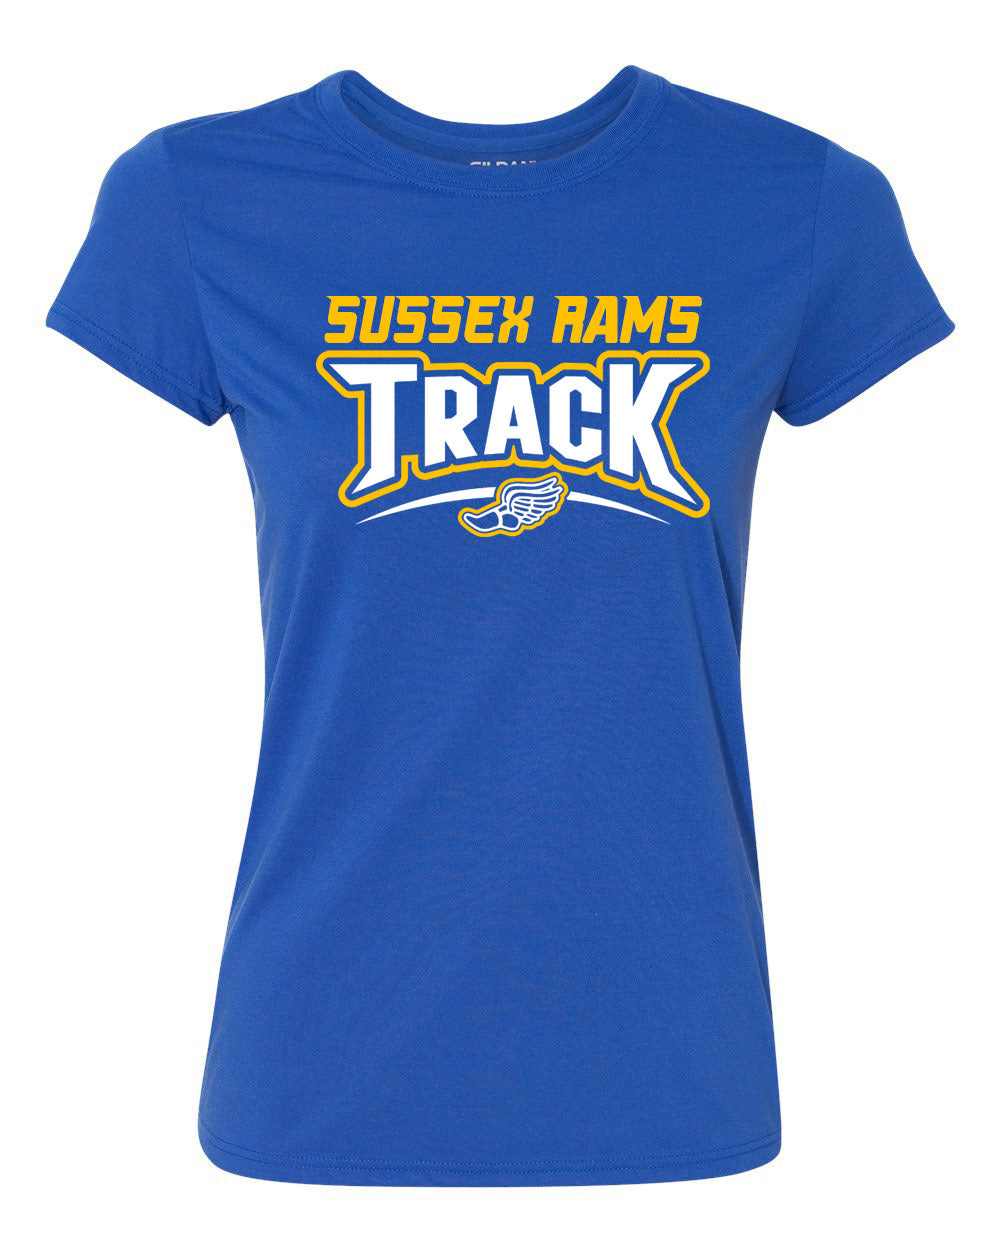 Sussex Rams LADIES Track Performance Material T-Shirt Team shirts